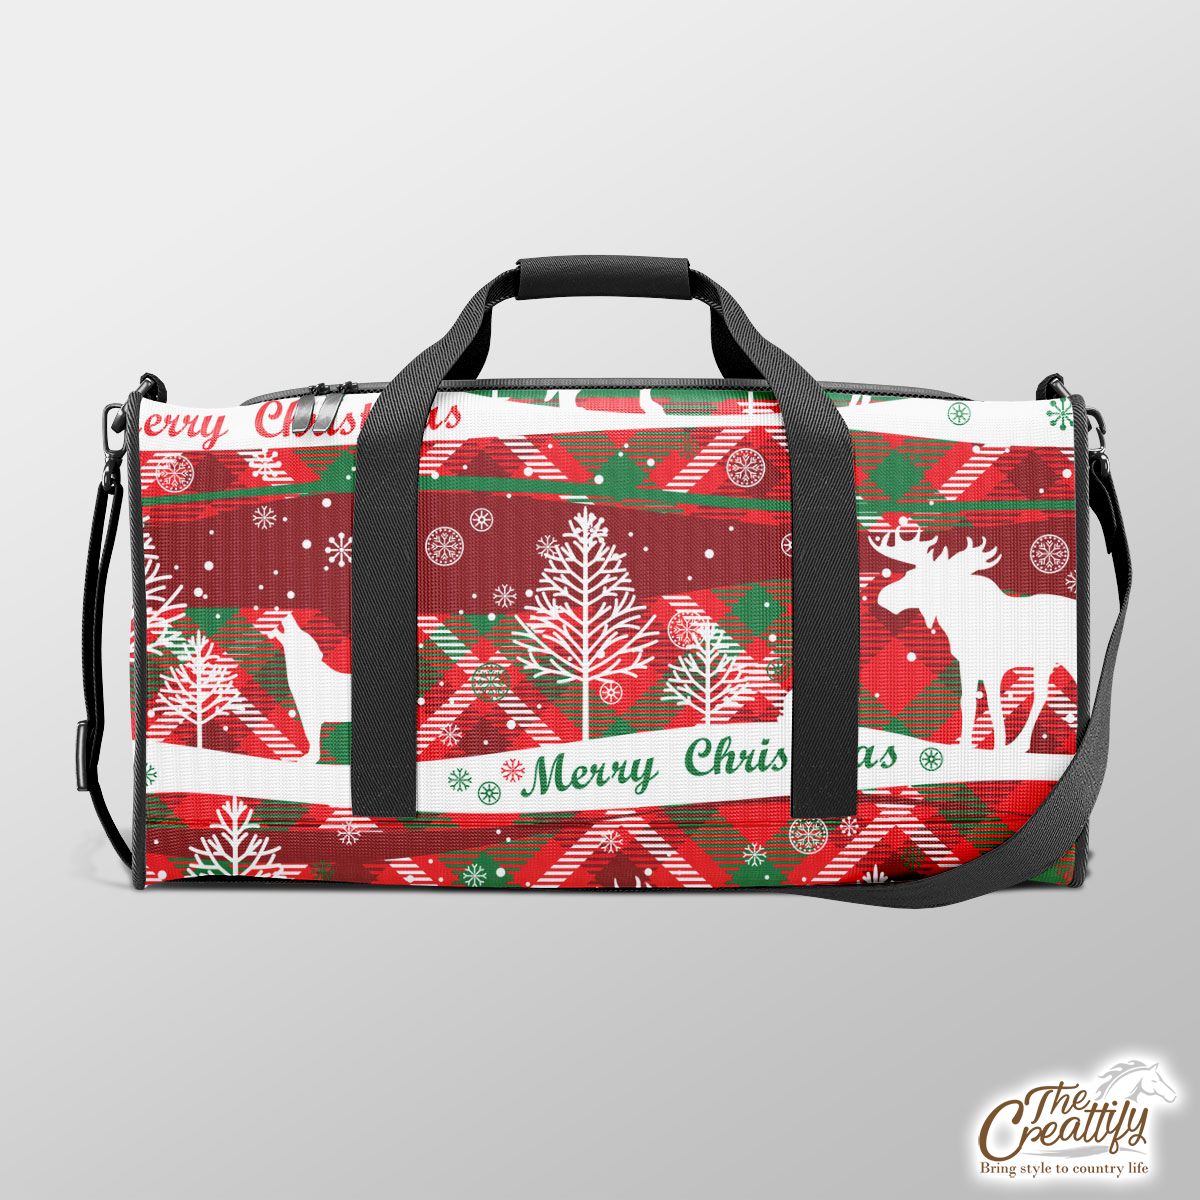 Moose With Merry Christmas Wishes Duffle Bag